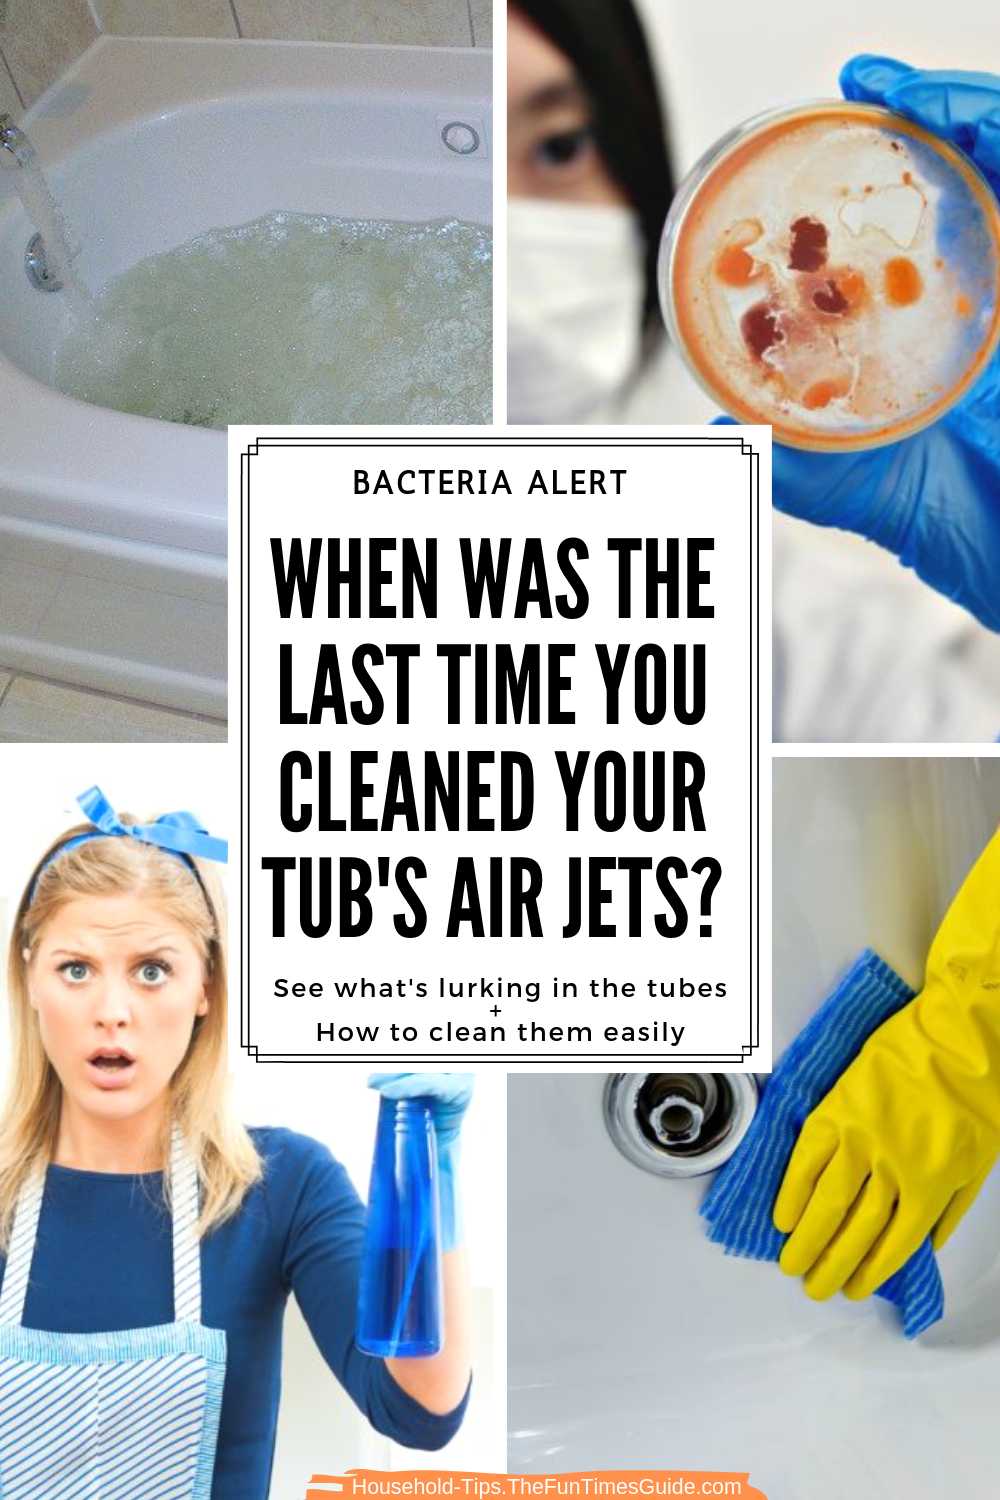 Diy Jetted Tub Cleaner The Bacteria, How To Clean Dirty Bathtub Jets